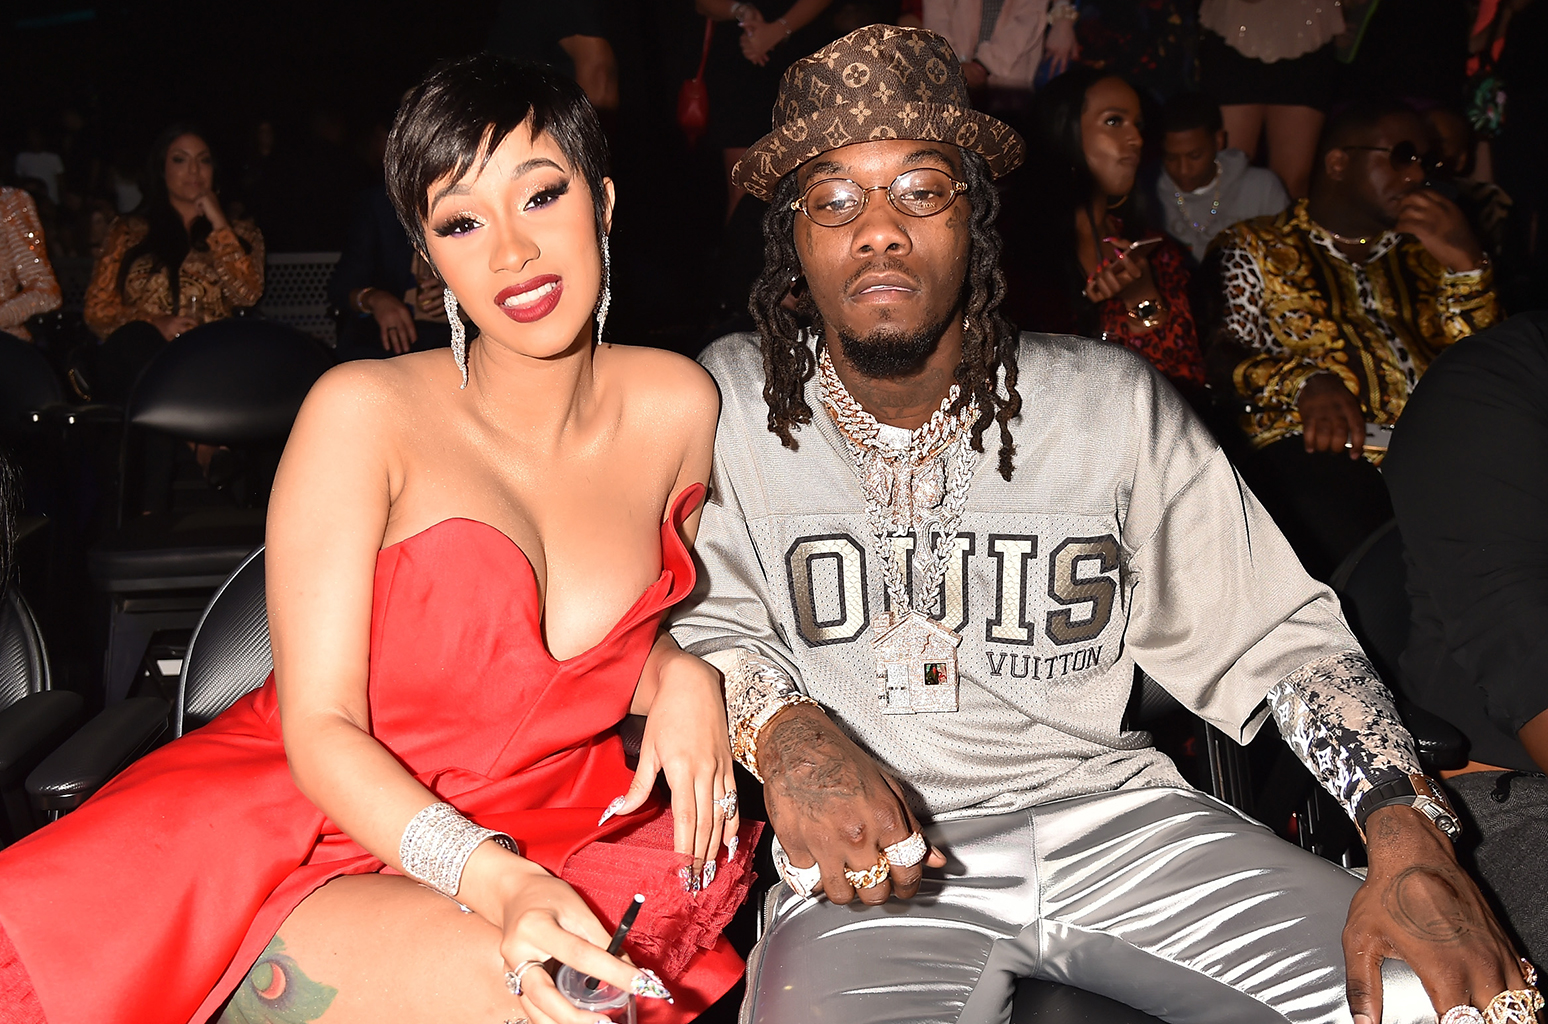 Cardi B Gets a Lamborghini Truck From Offset for Her Birthday: Watch